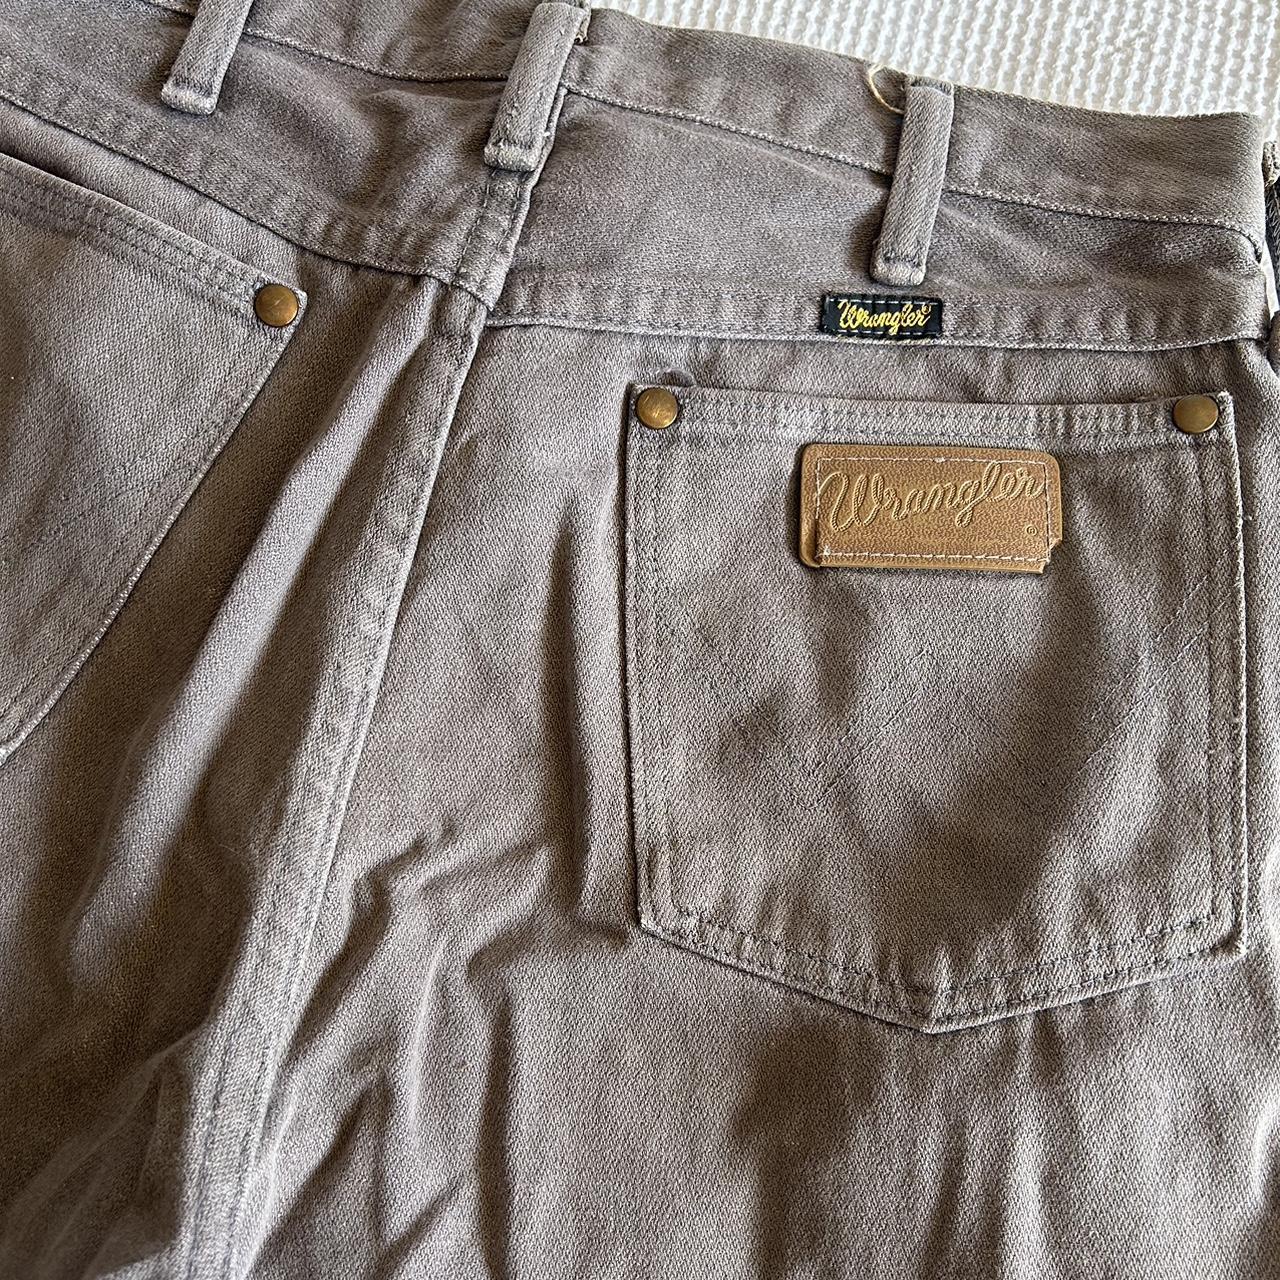 Worn vintage wrangler jeans. No tag but they fit... - Depop